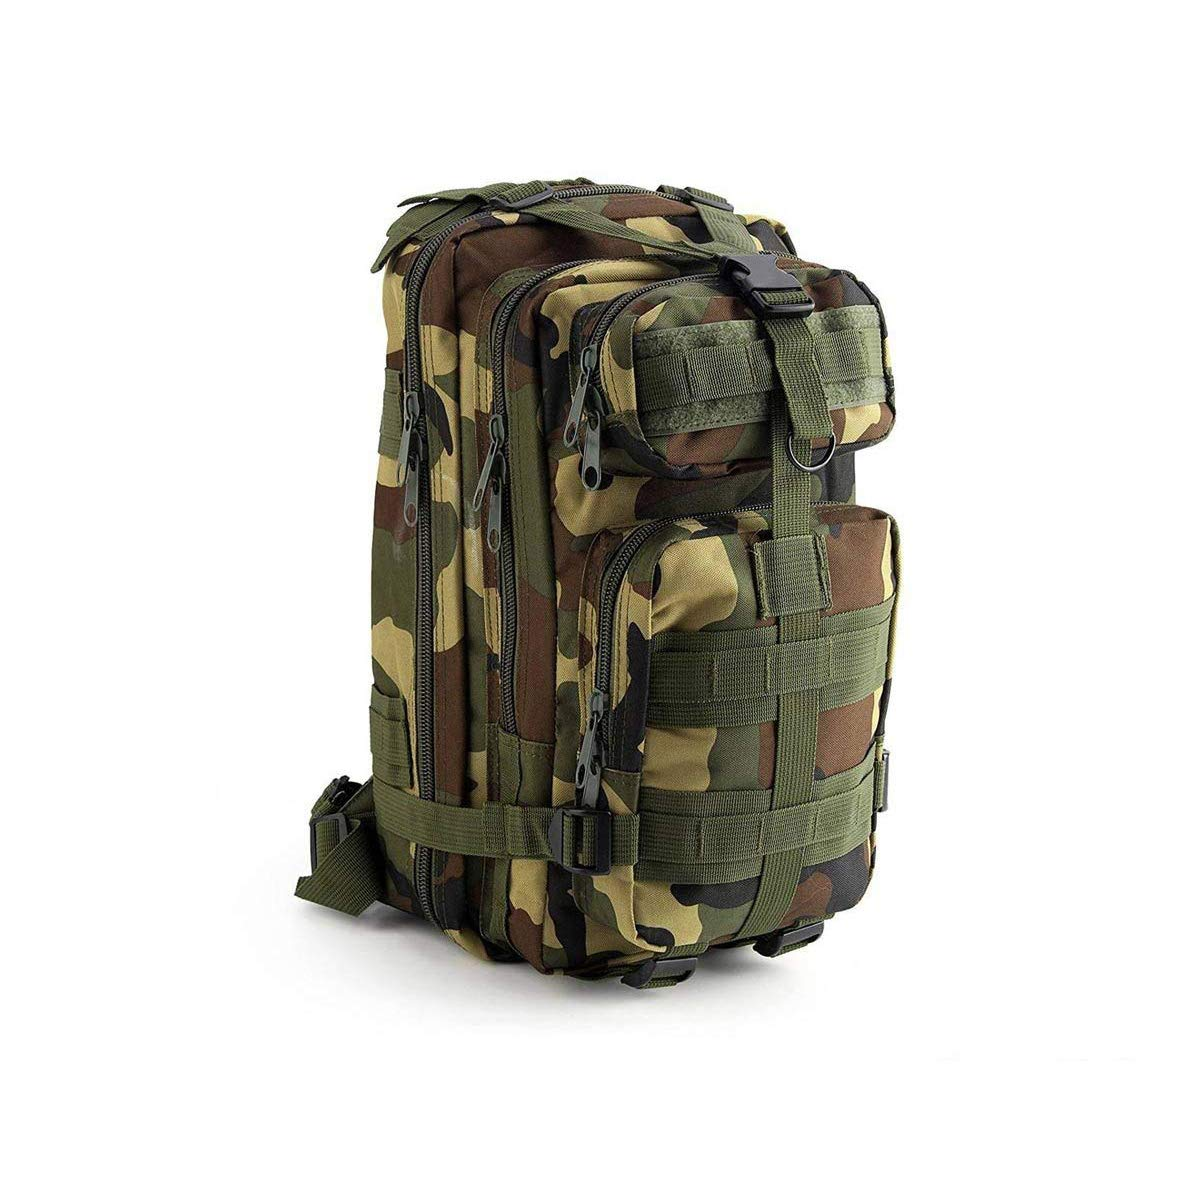 30L Molle Military Tactical Backpack Rucksack Travel Bag Hiking Outdoor ...